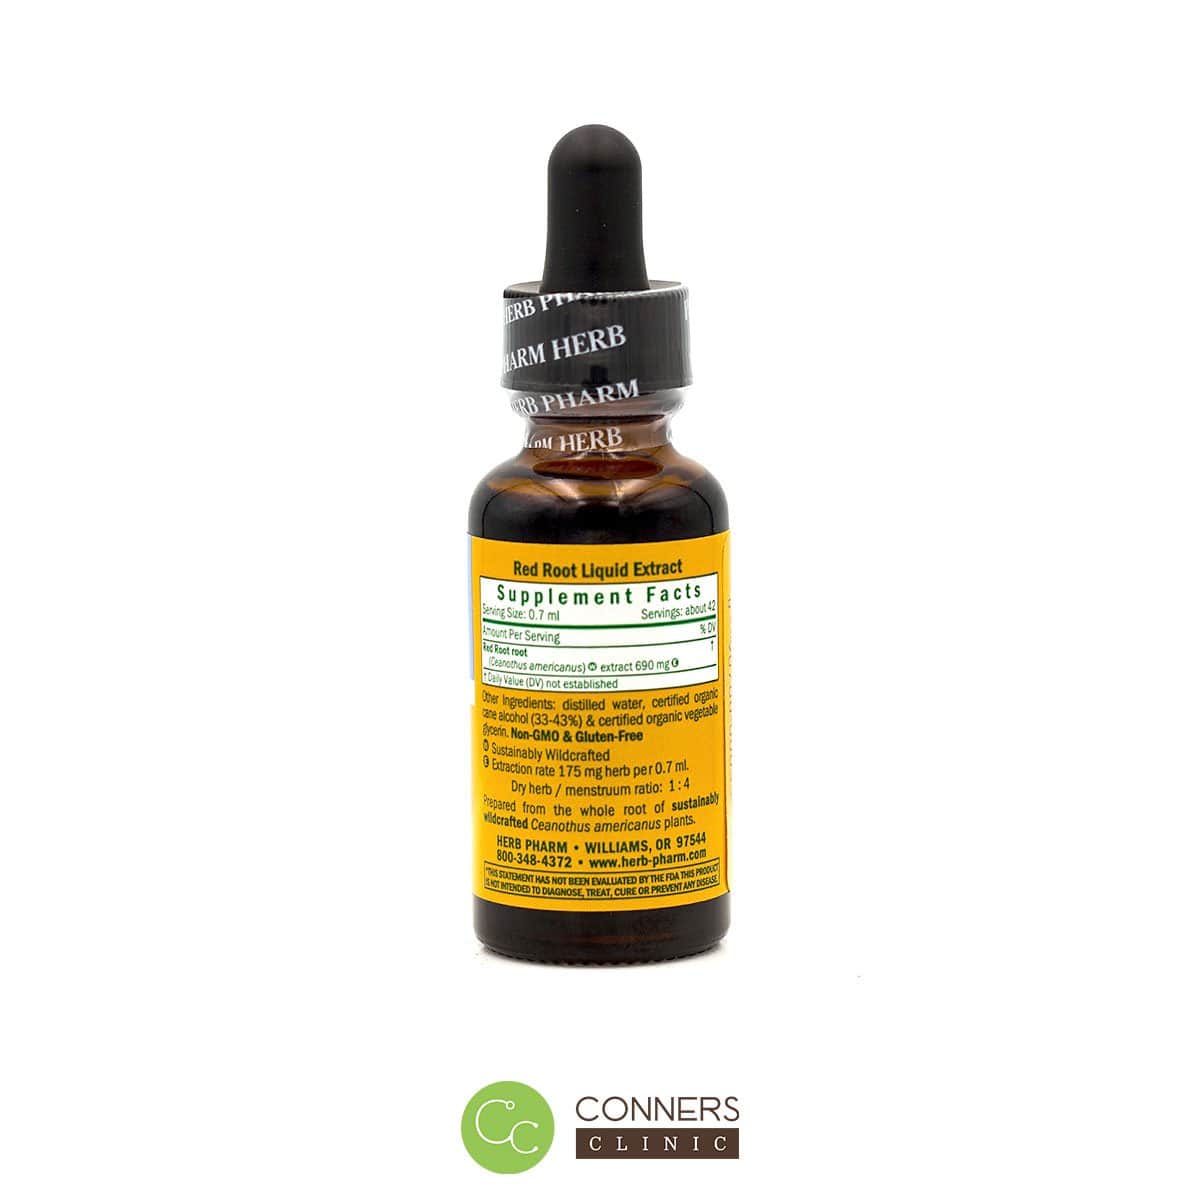 Red Root tincture Herb Pharm Supplement - Conners Clinic